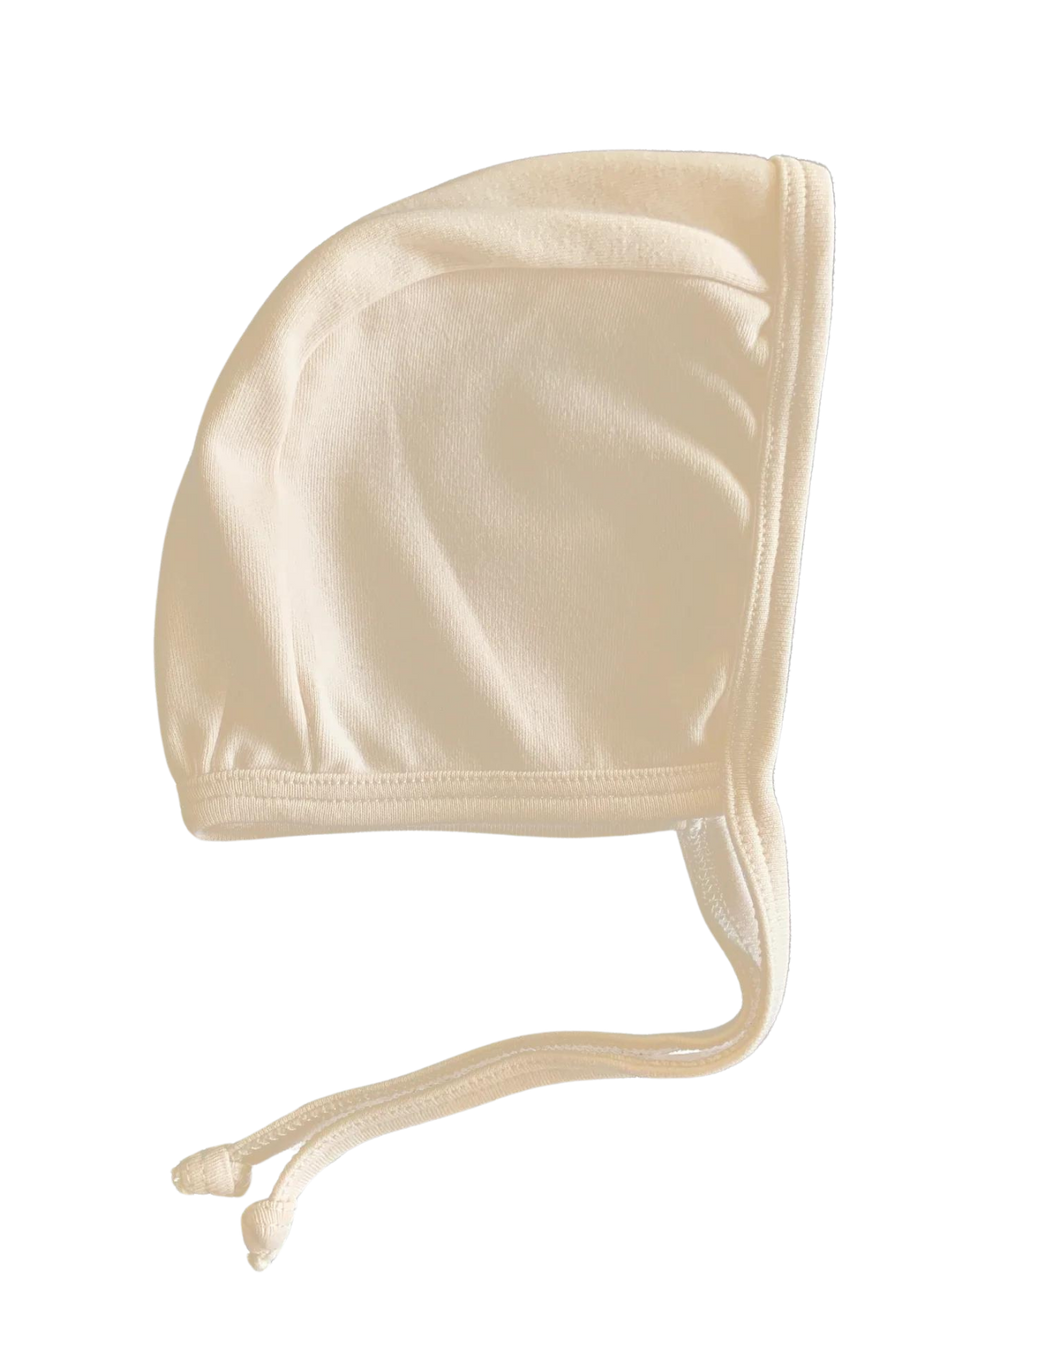 Organic Cotton unisex bonnet in Dove - CovetedThings